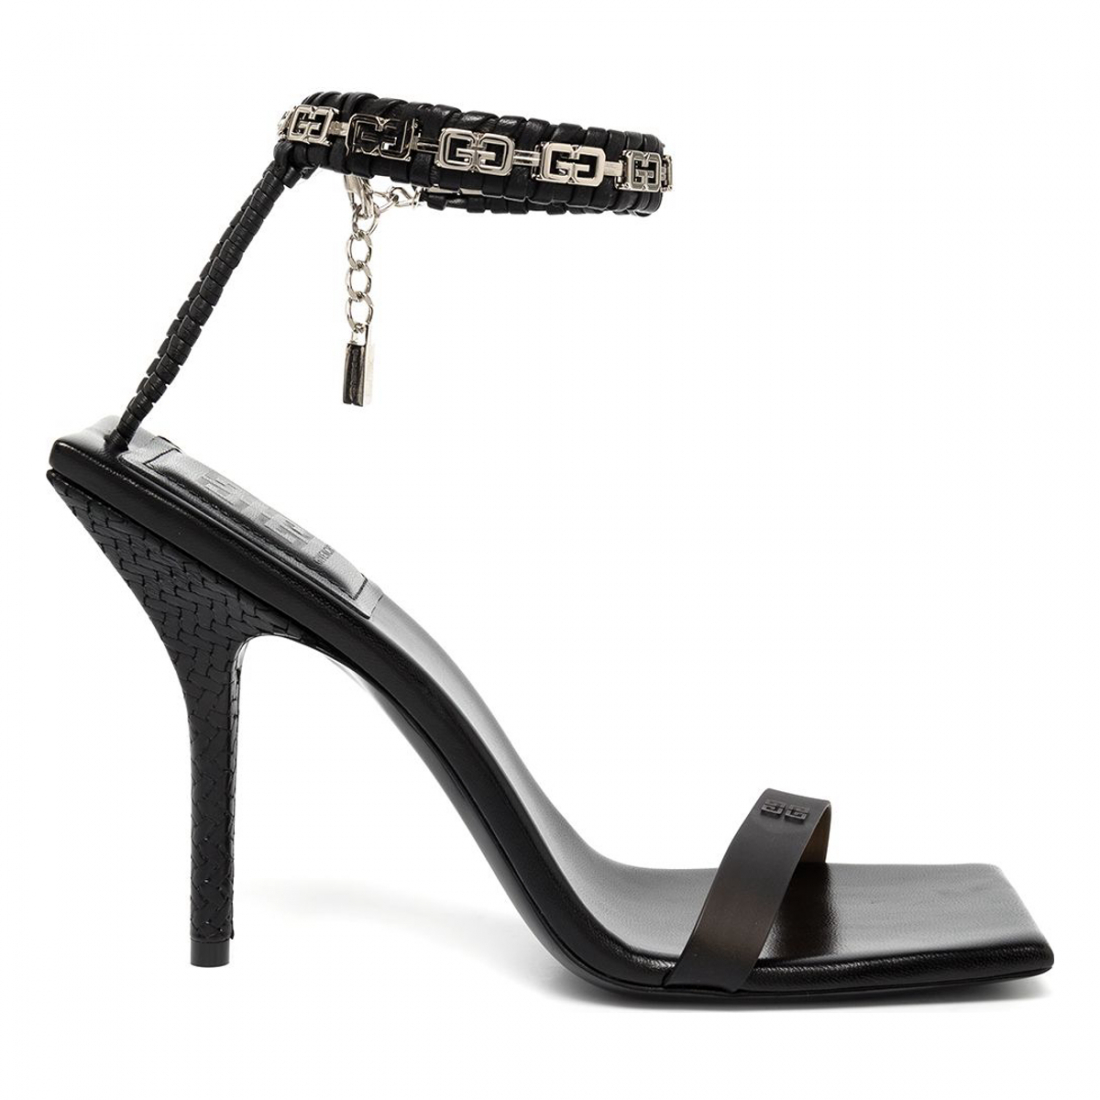 Women's '100 Braided' Ankle Strap Sandals